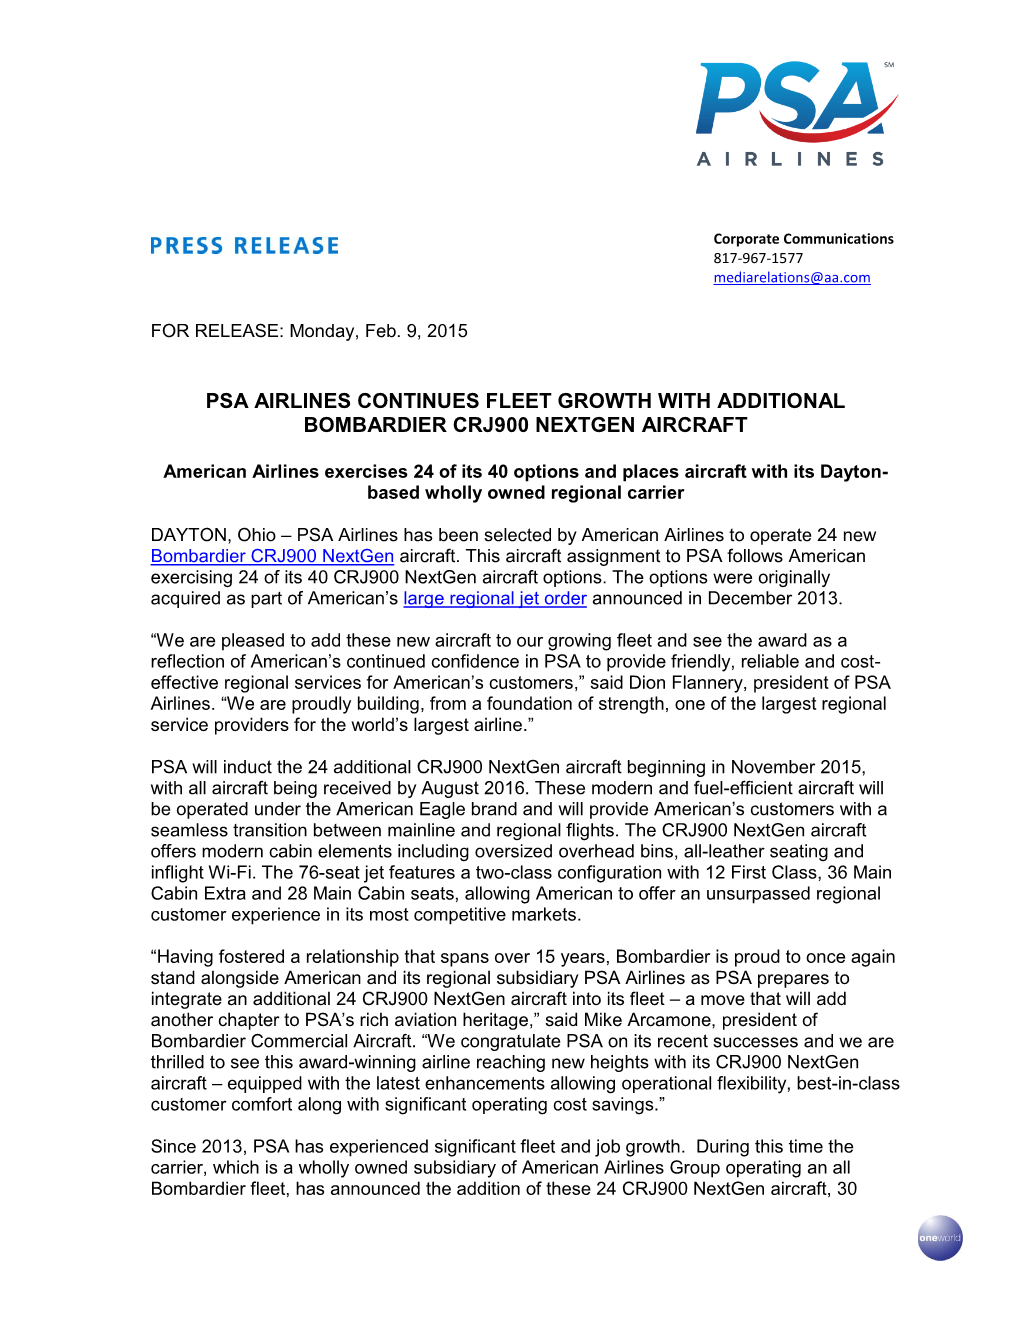 Psa Airlines Continues Fleet Growth with Additional Bombardier Crj900 Nextgen Aircraft